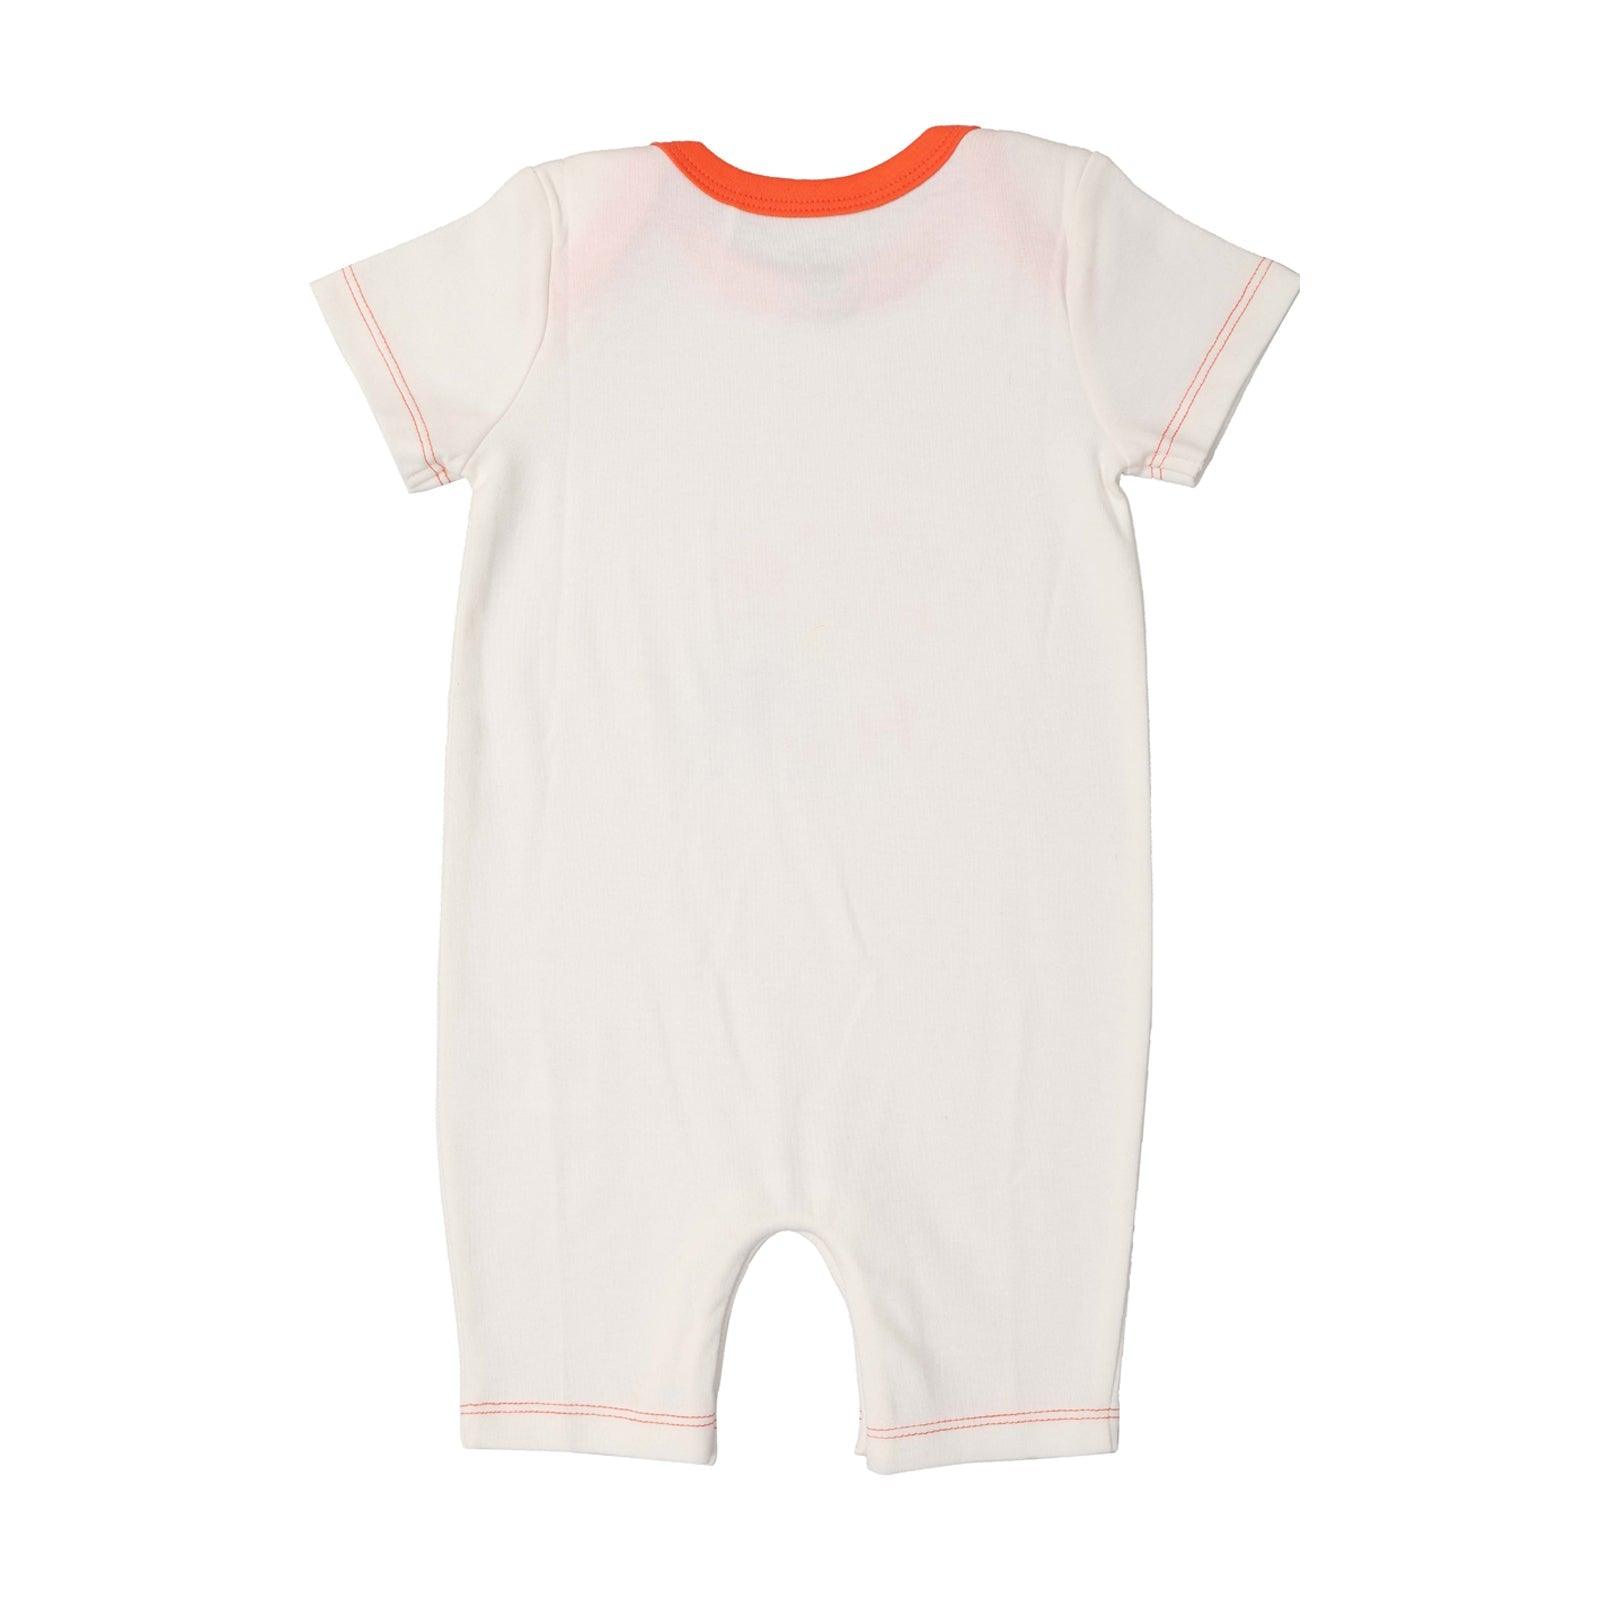 The Best Friend Ever Romper - White - Juscubs